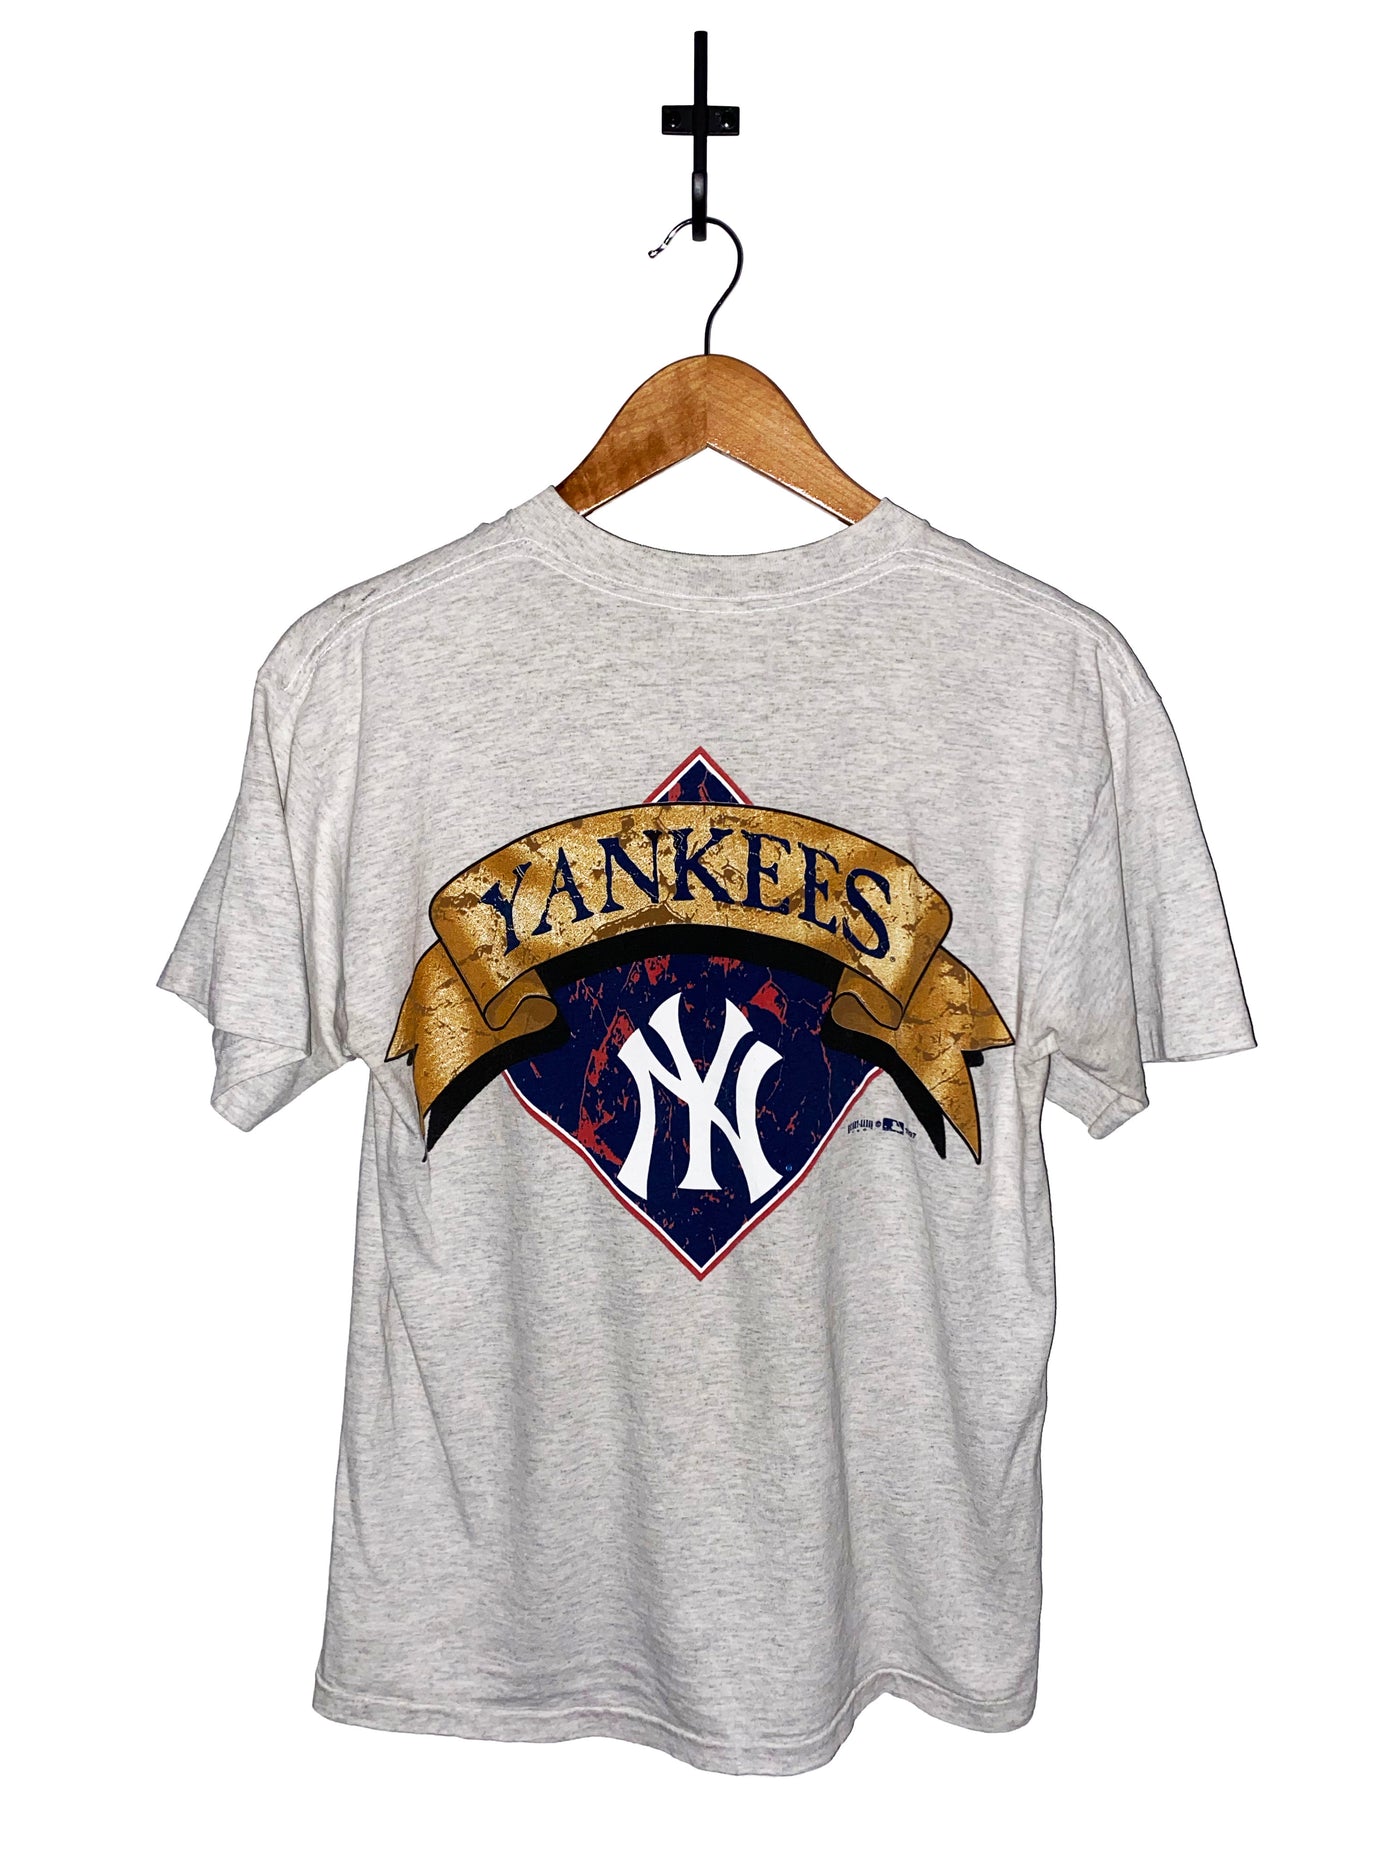 Vintage 1997 Double Sided Yankees T-Shirt